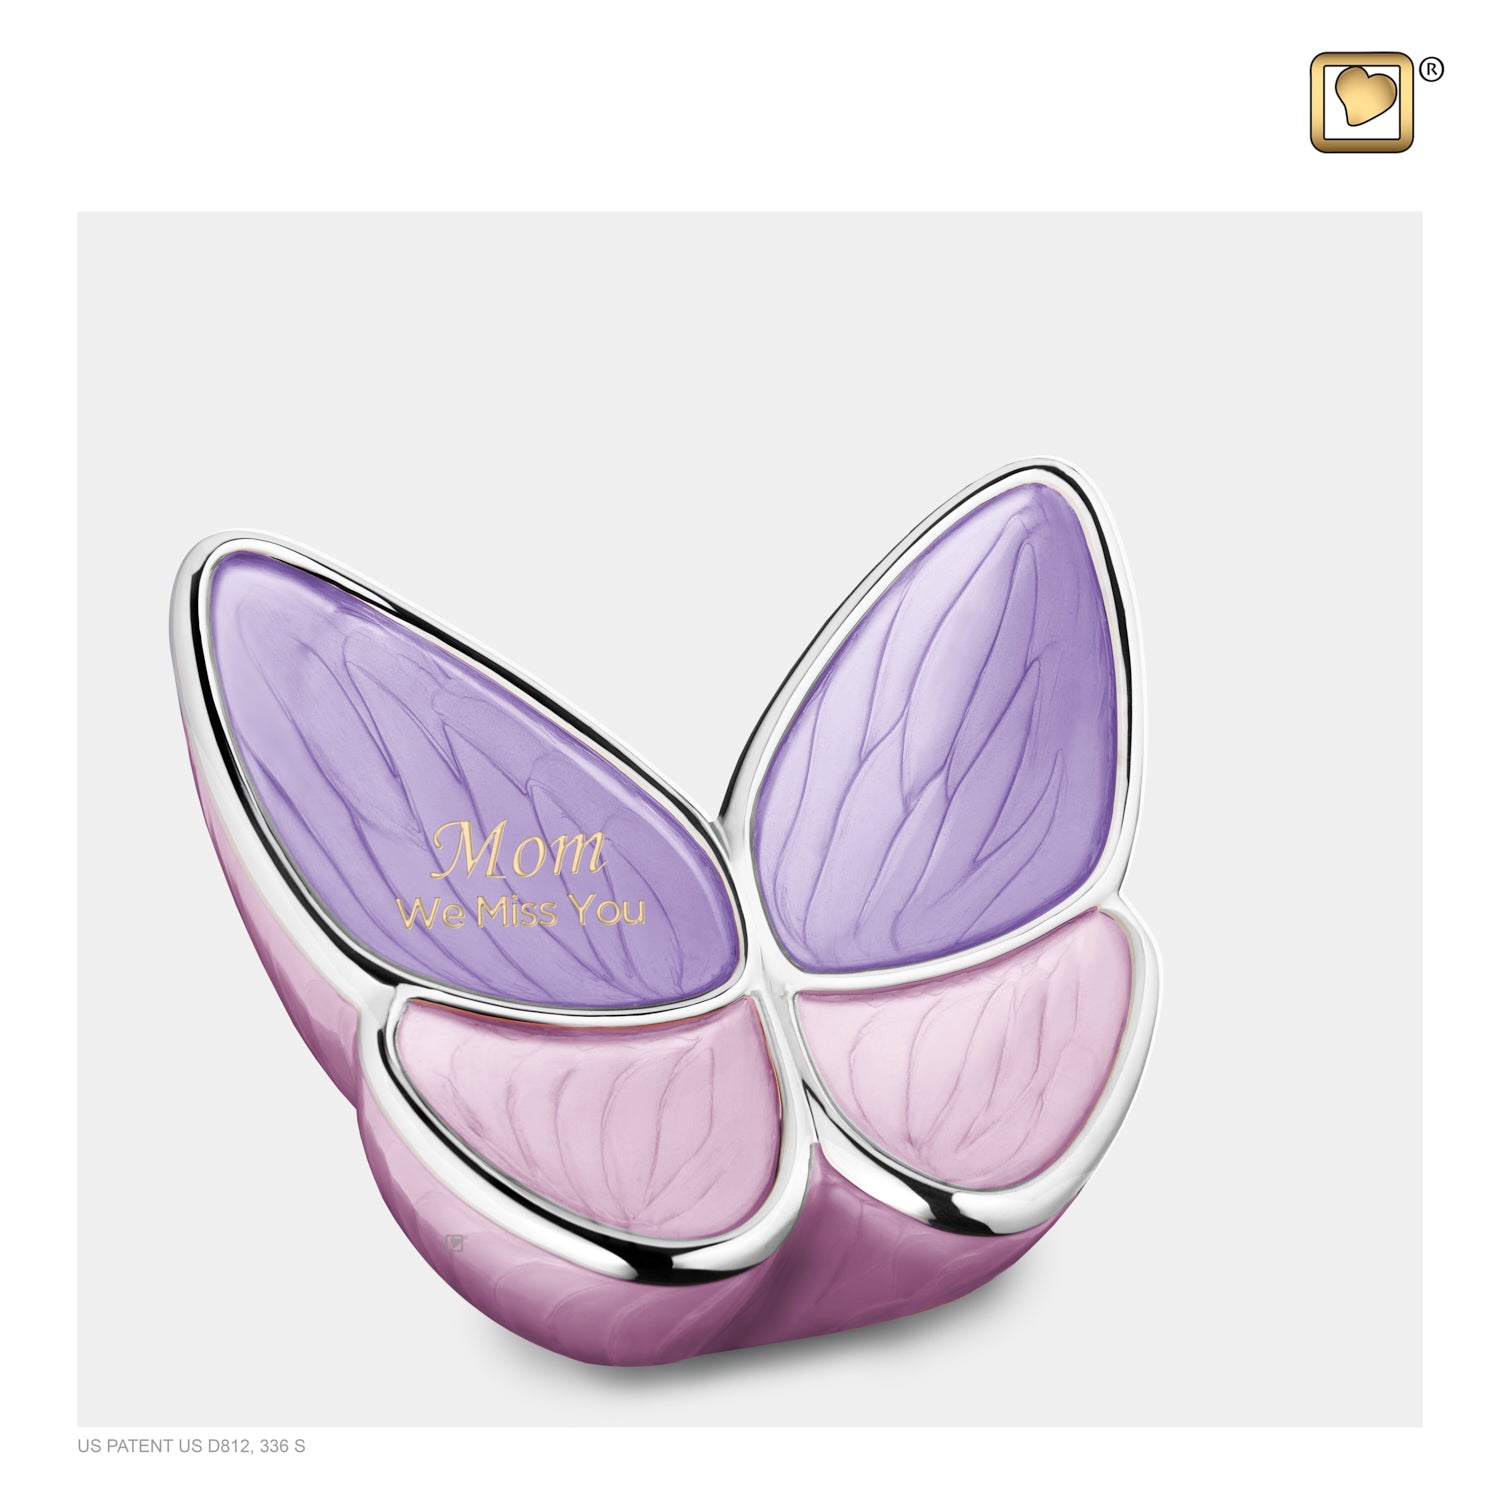 Medium Wings of Hope Butterfly Lavender Cremation Urn